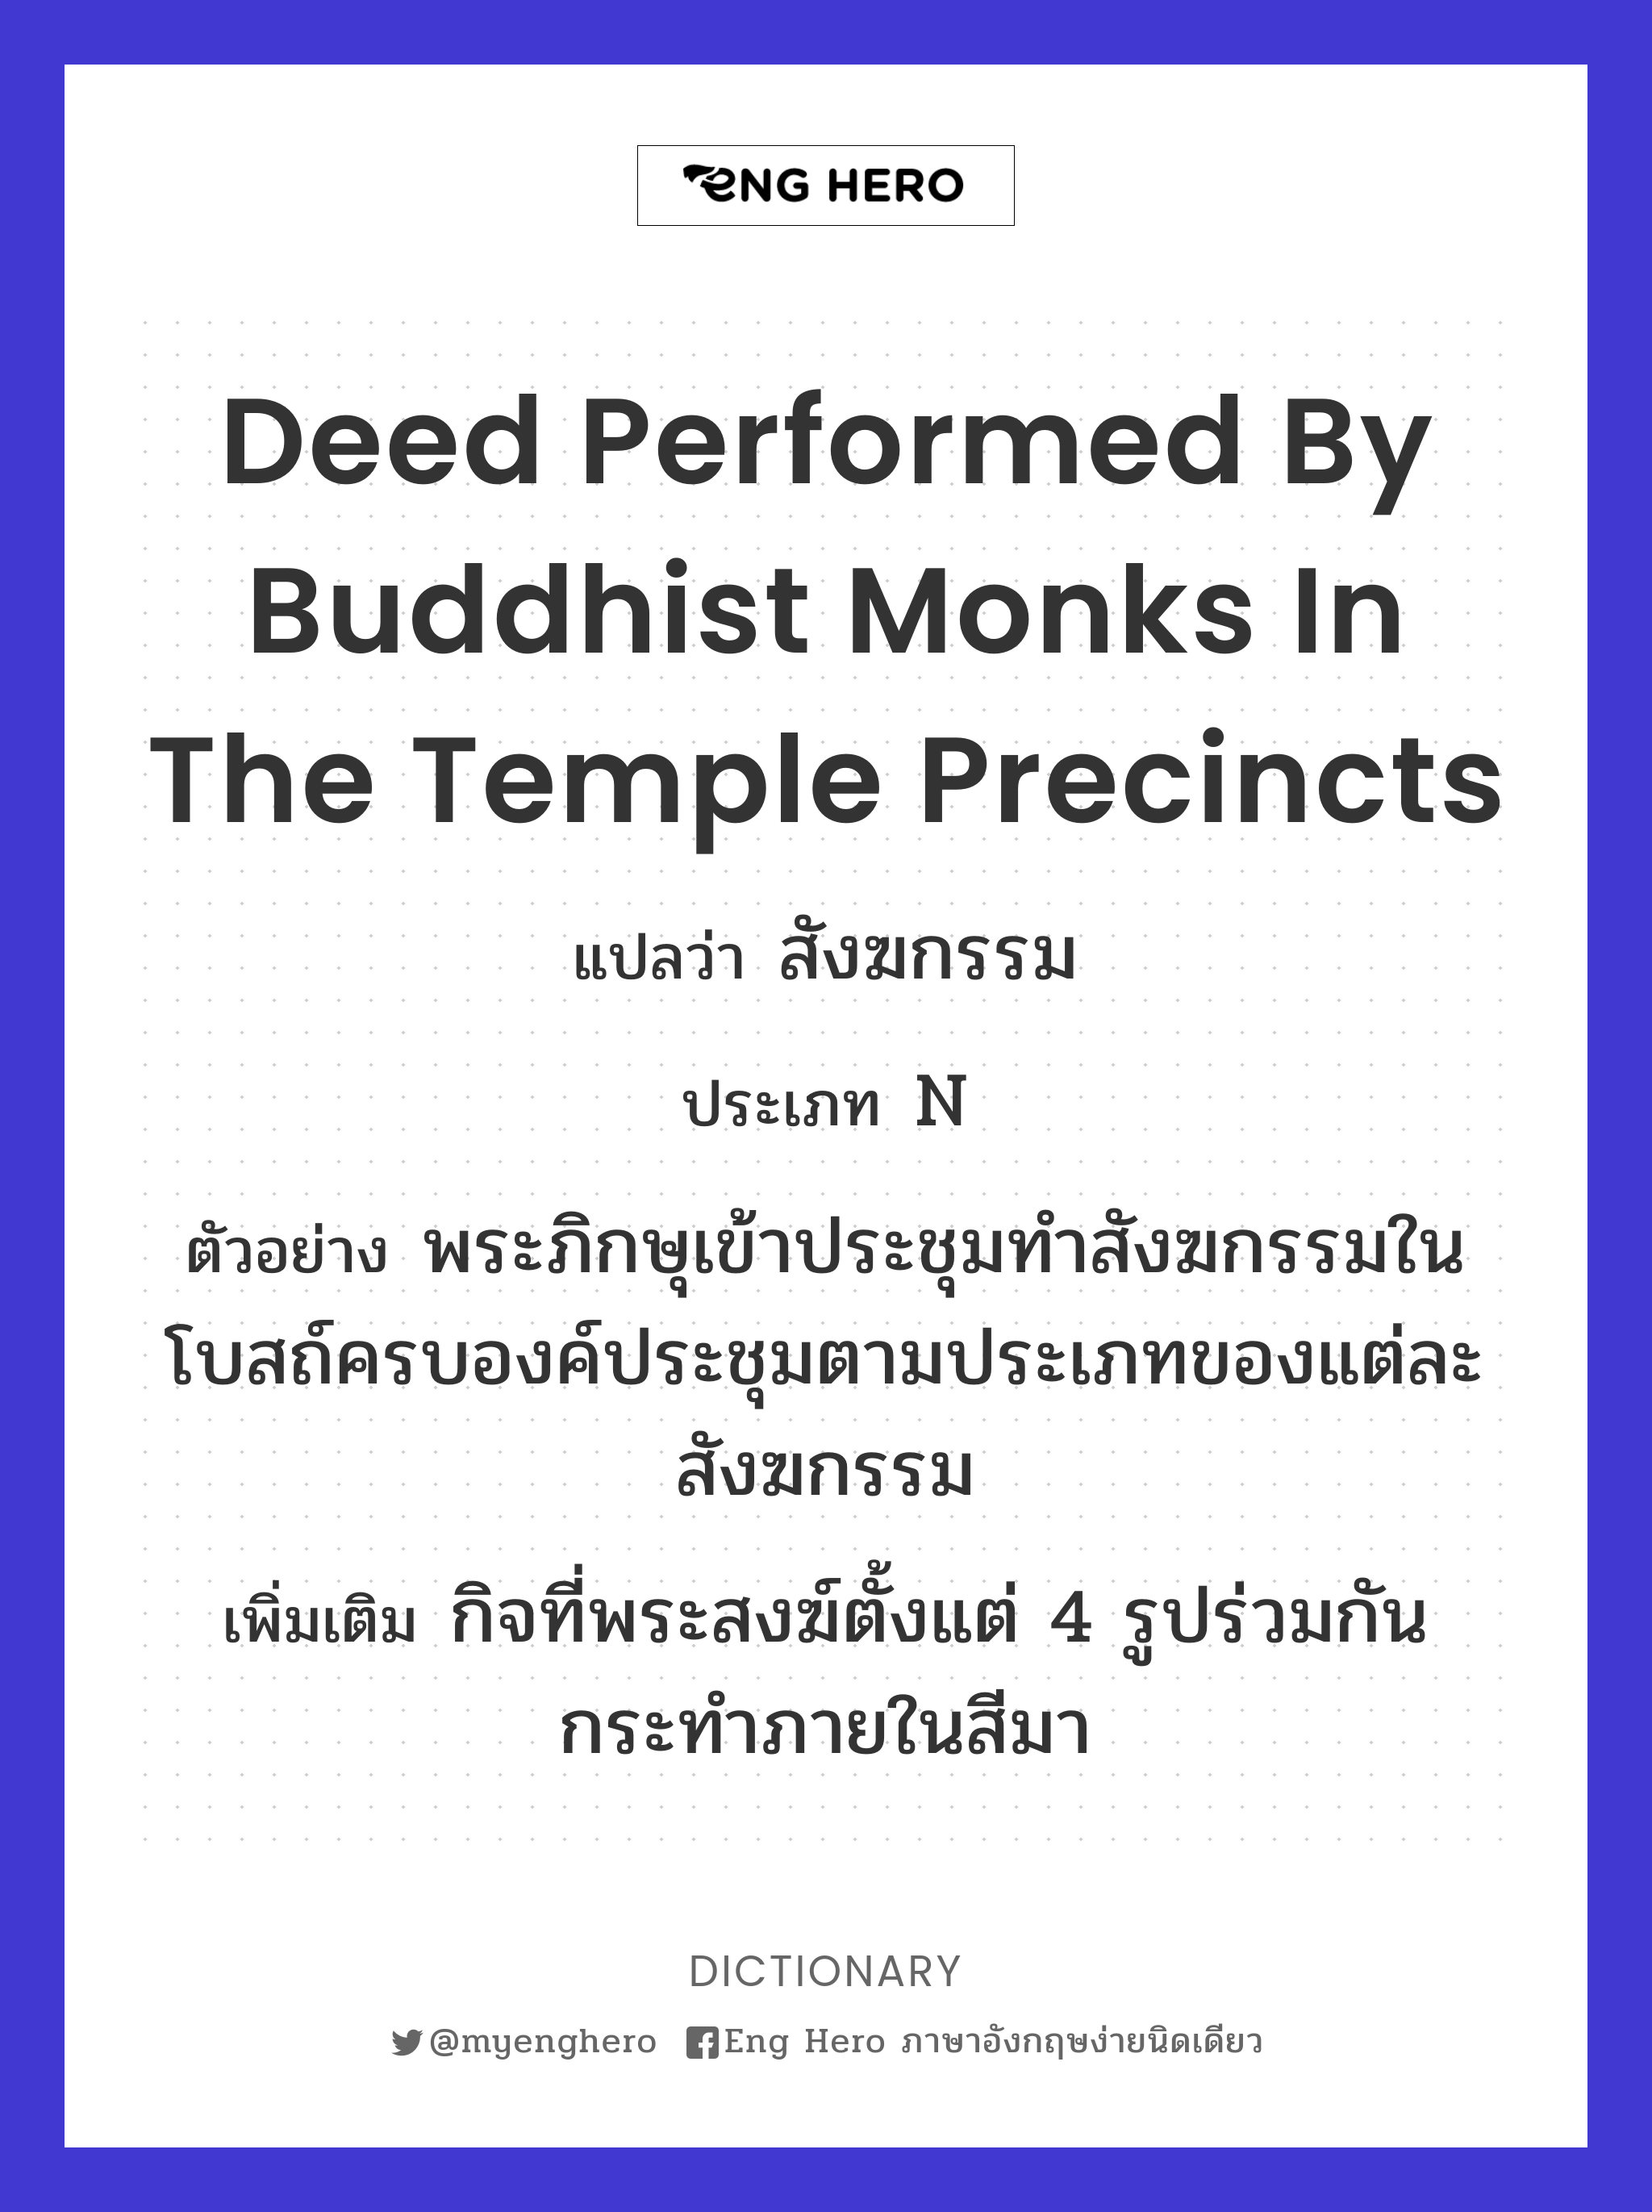 deed performed by Buddhist monks in the temple precincts